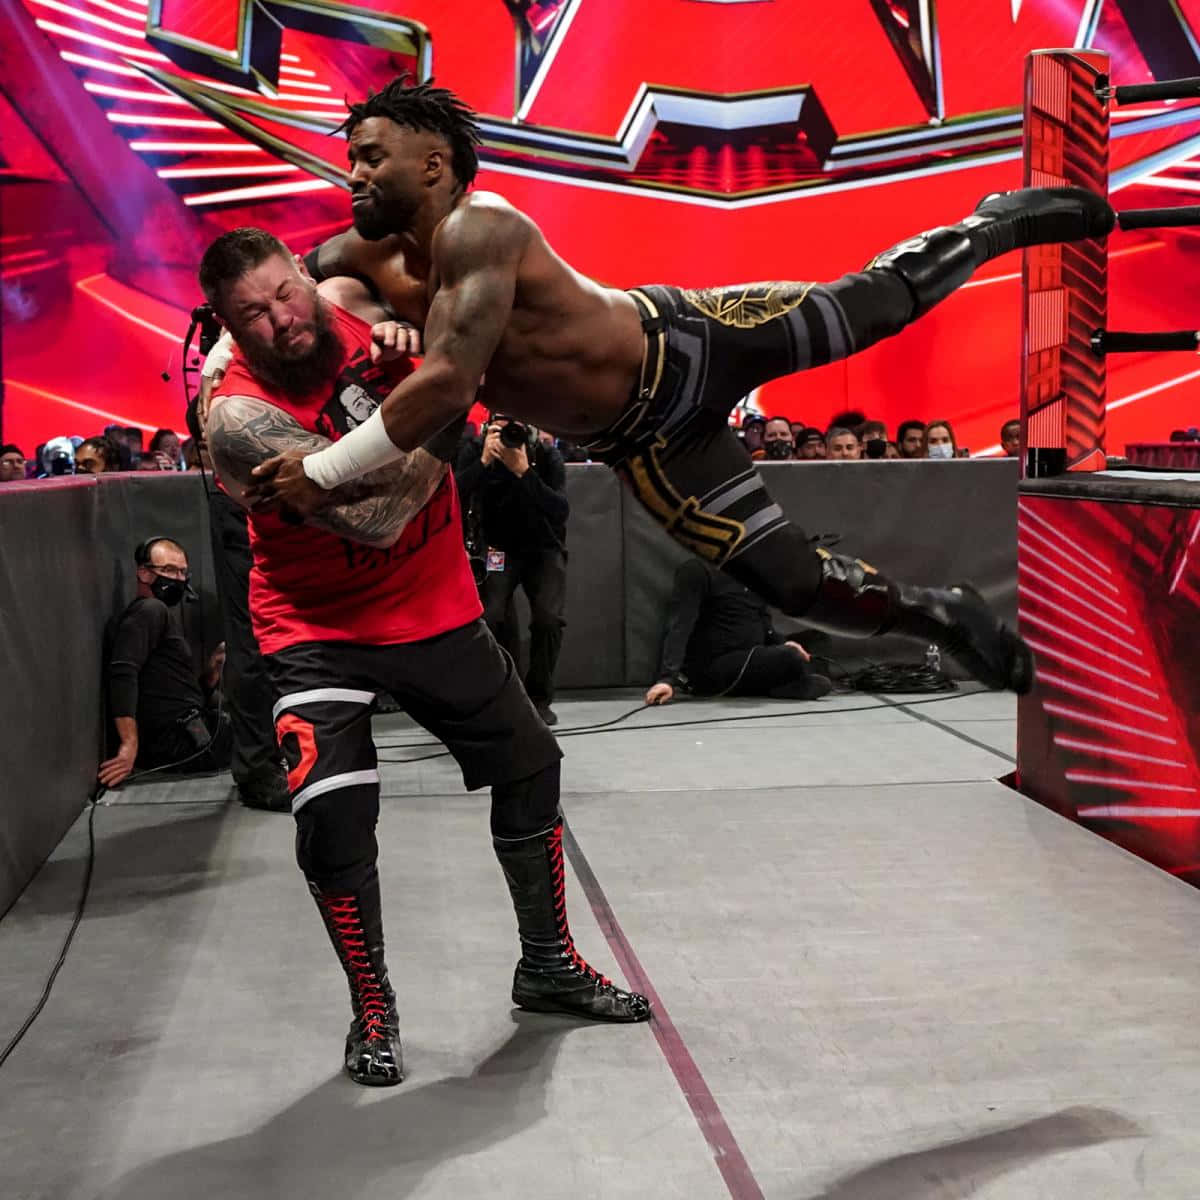 Caption: Intense Showdown between Cedric Alexander and Kevin Owens at WWE Raw Wallpaper